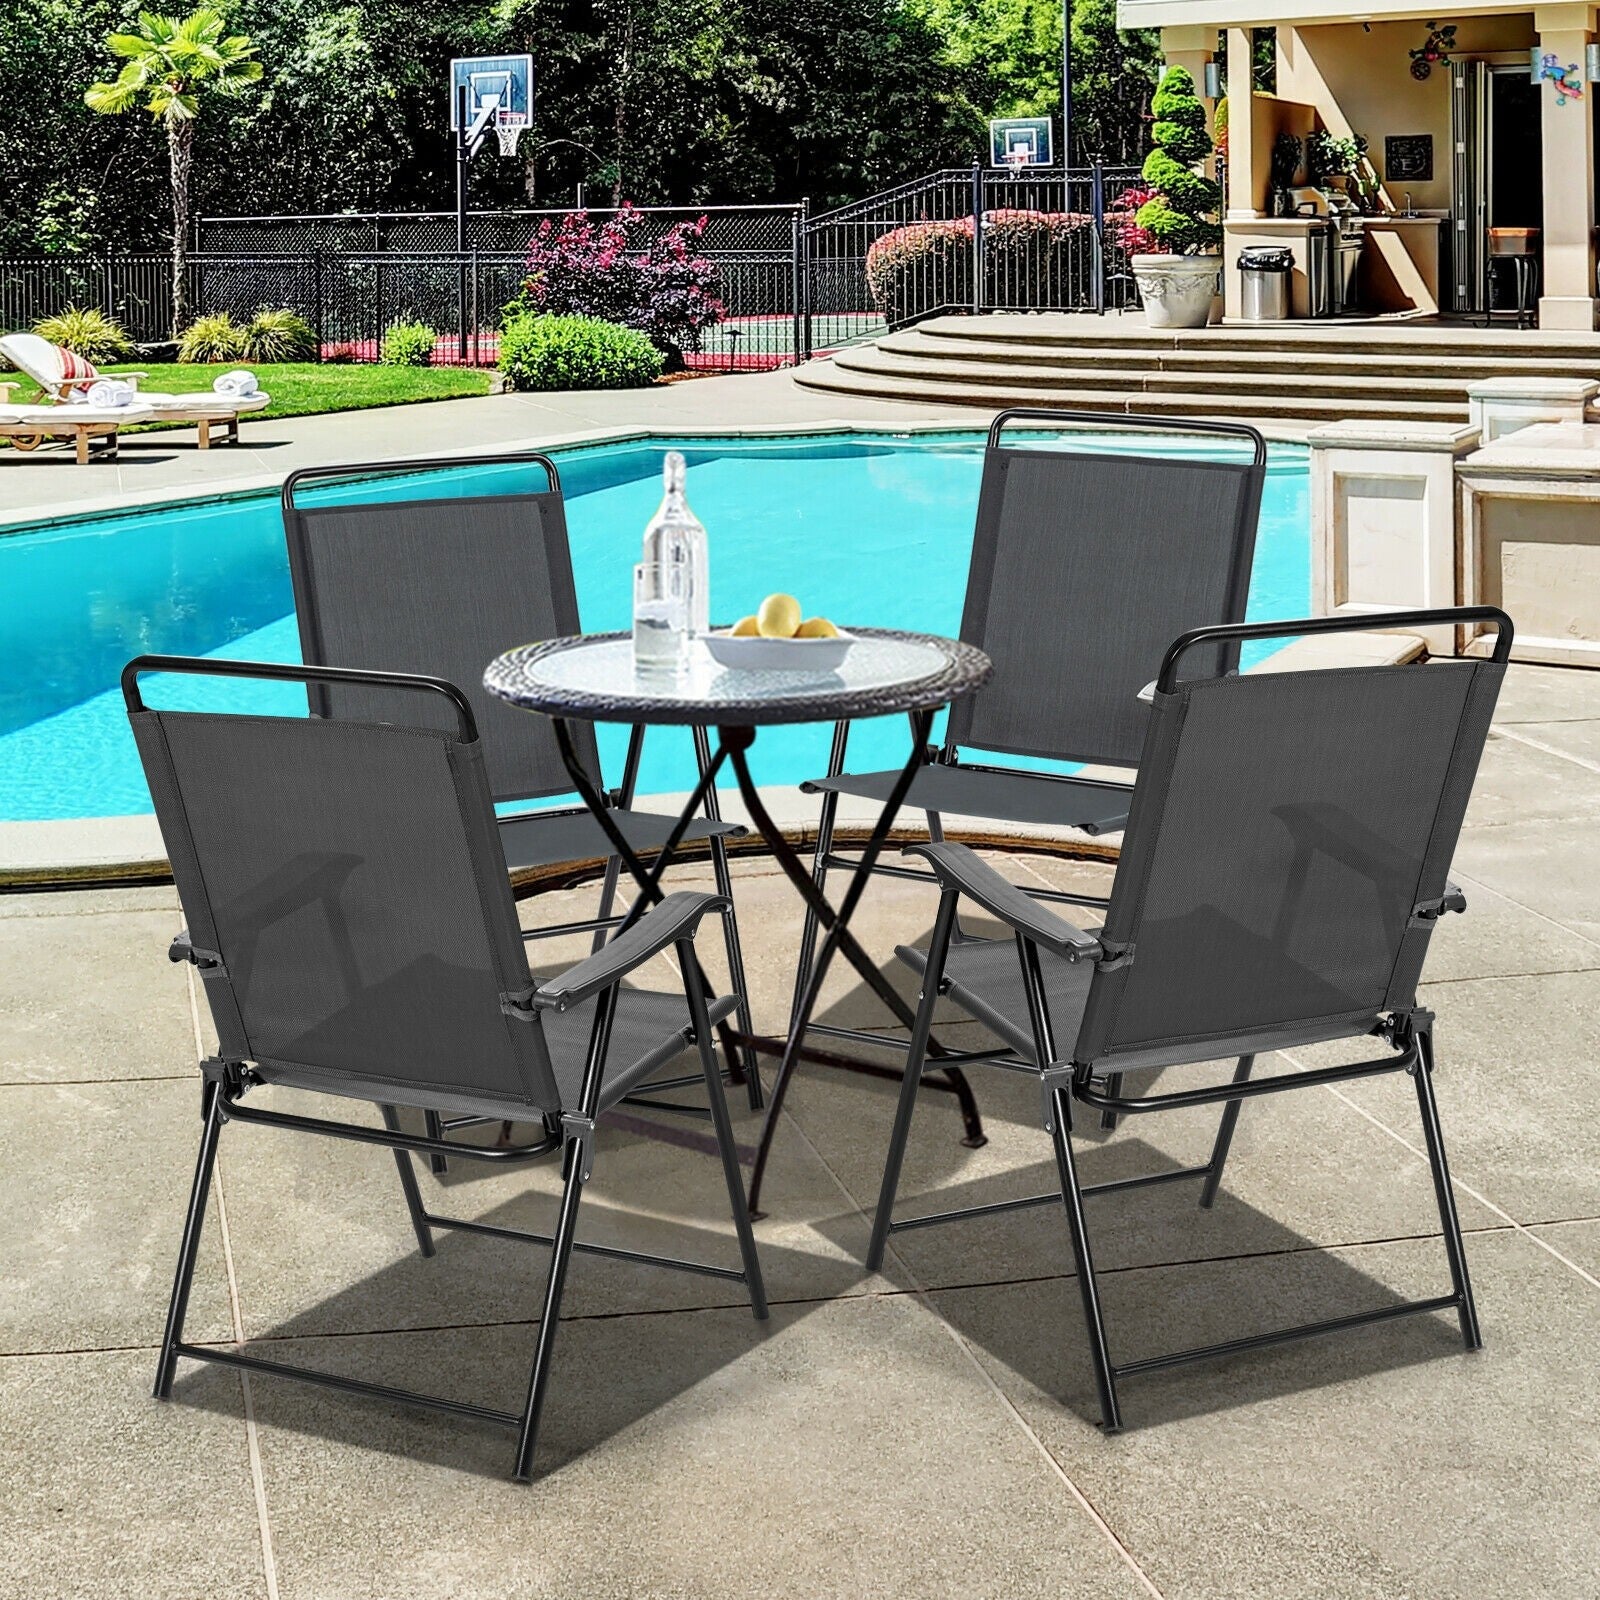 Set of 4 Folding Patio Chairs, Patio Dining Chairs